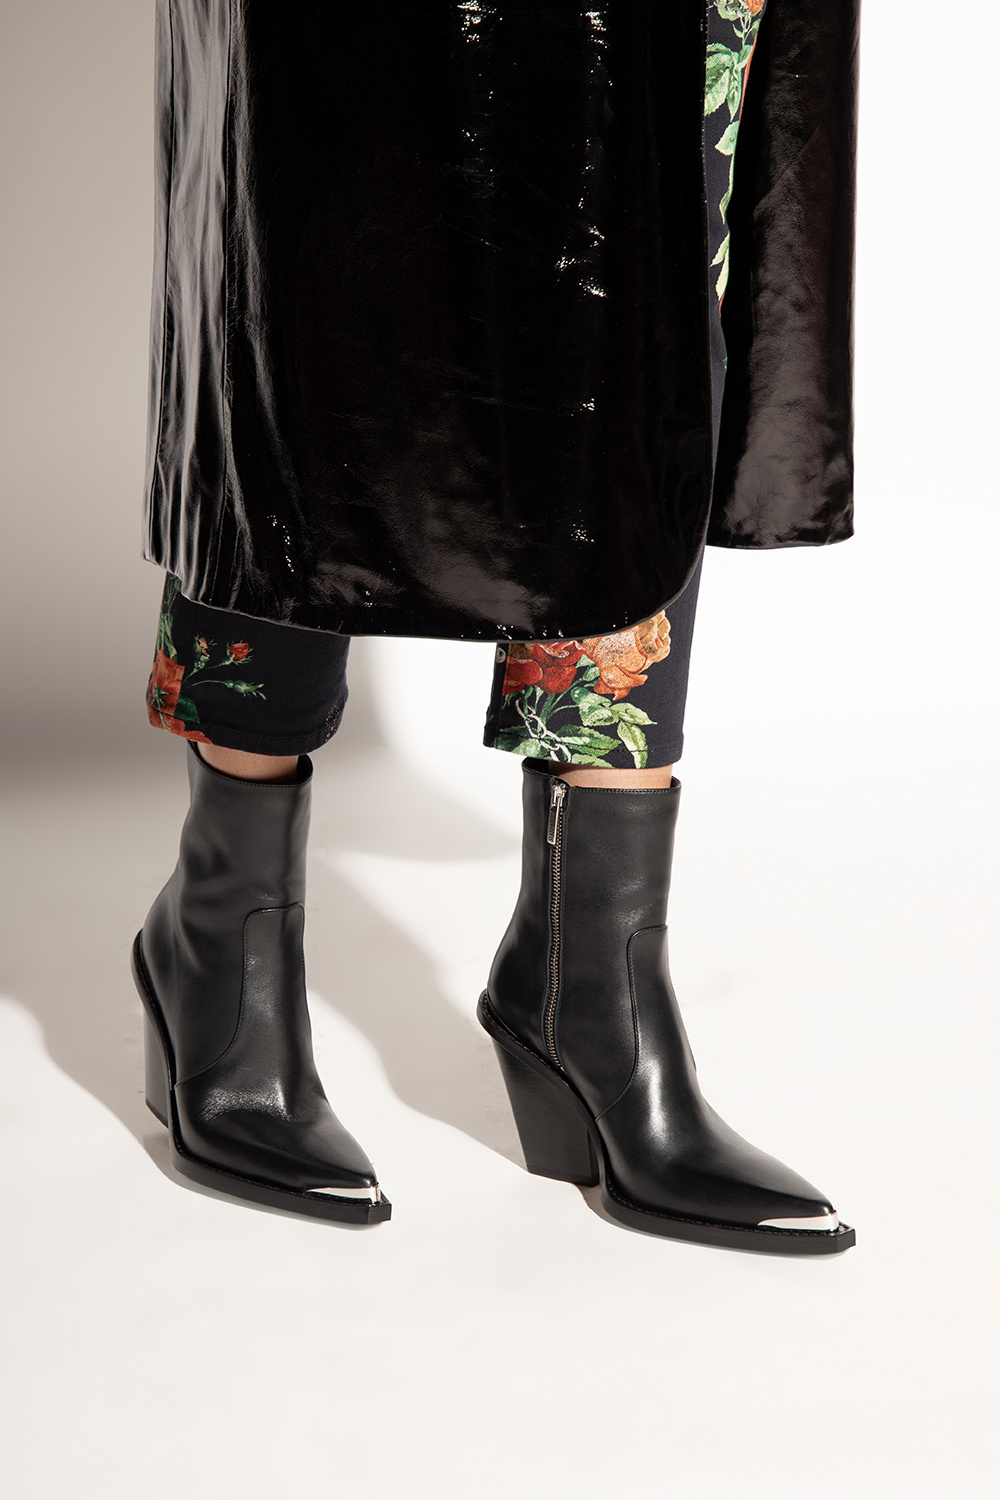 Paris Texas ‘Rodeo’ heeled ankle boots